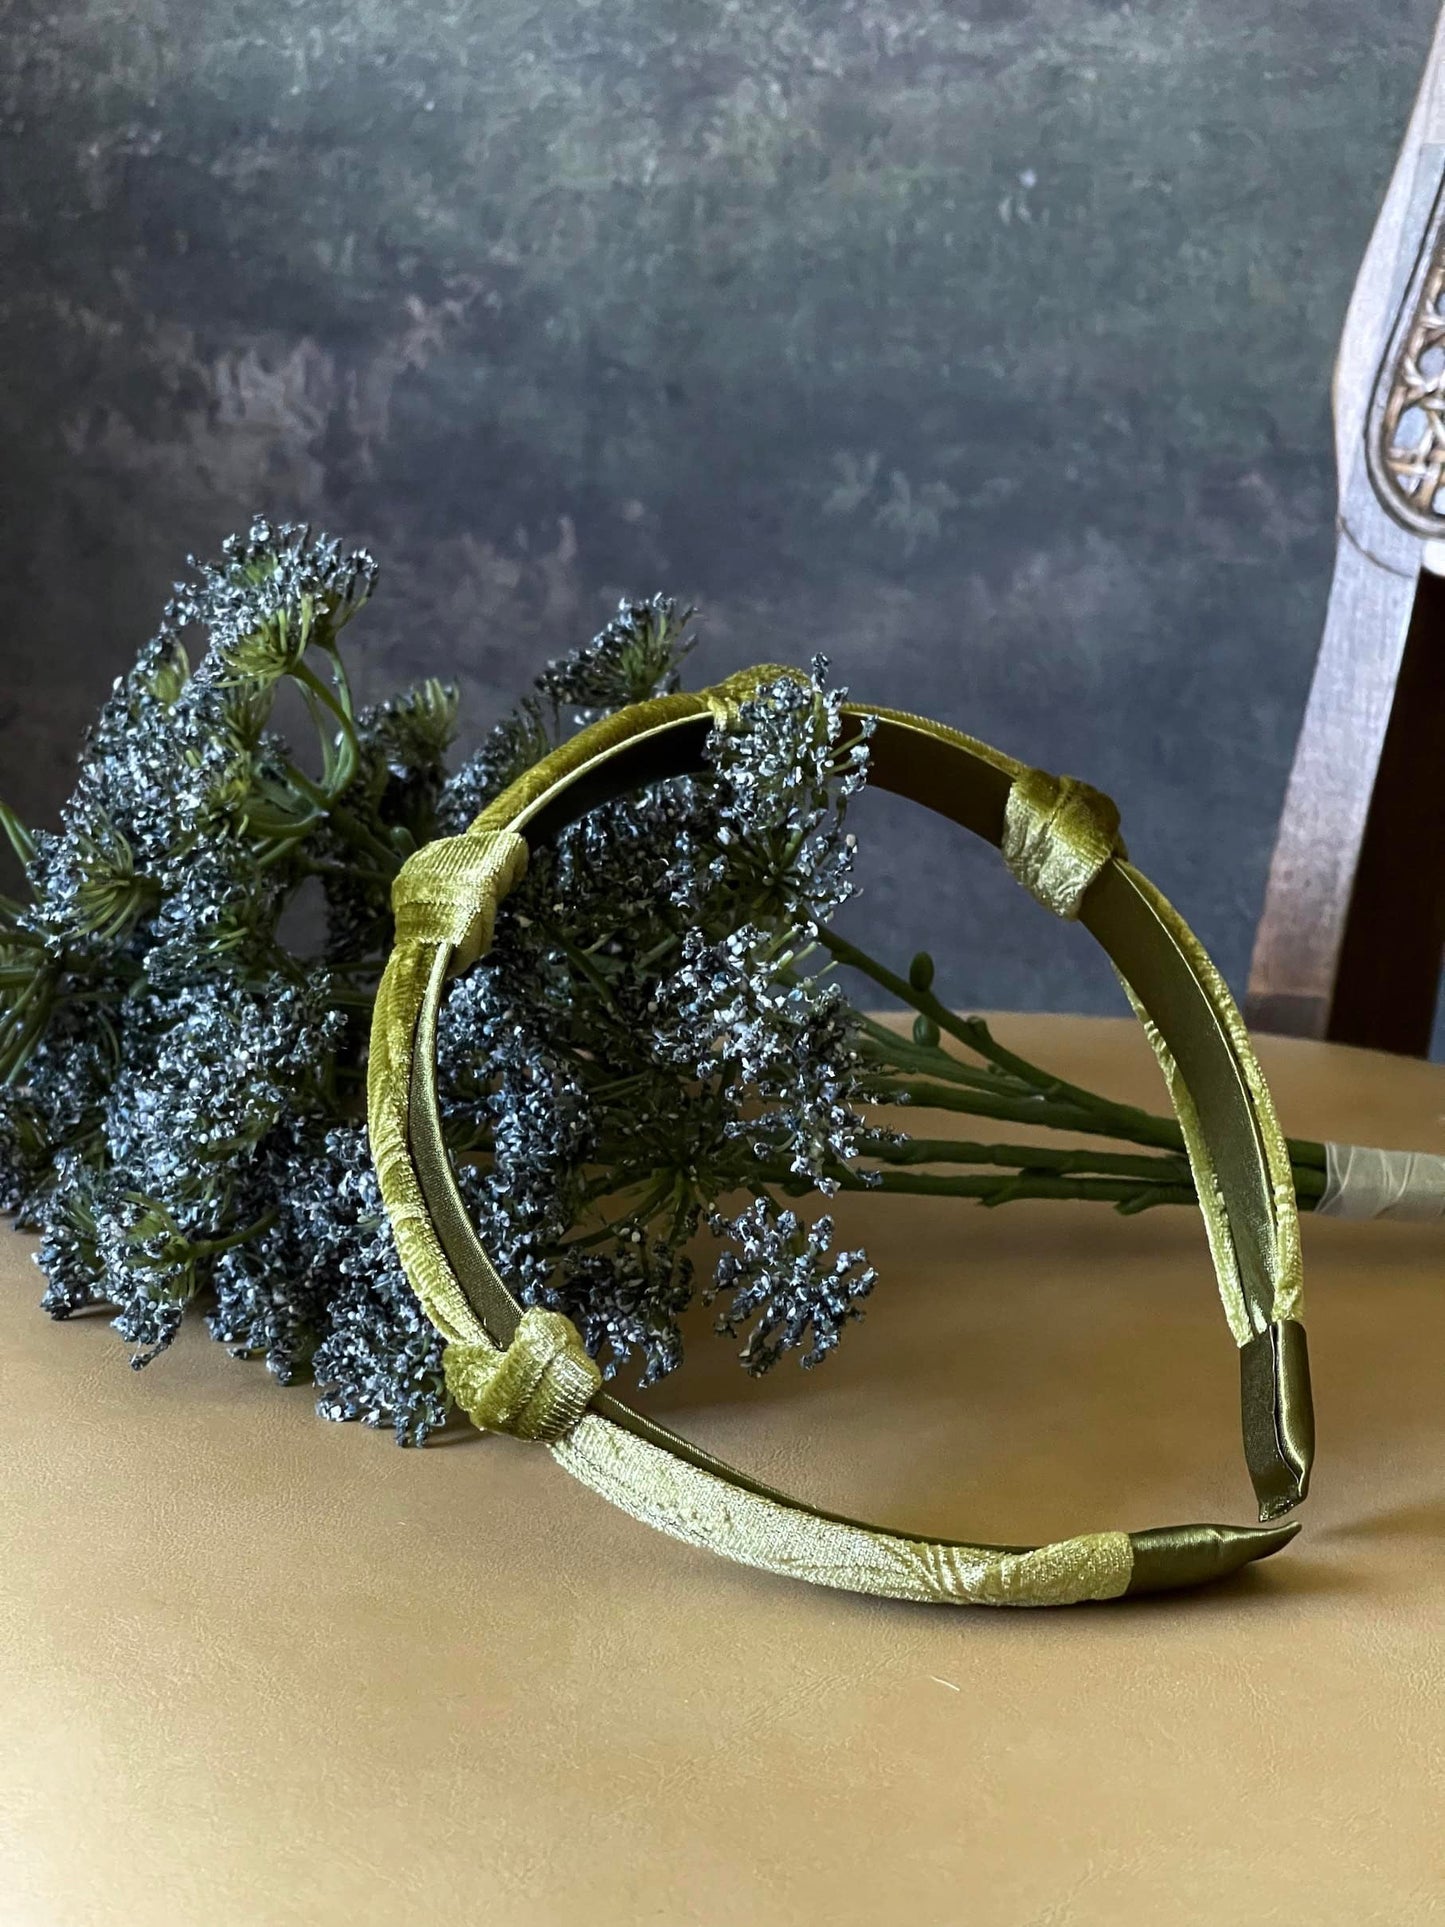 A historically inspired vintage style velvet floral knotted headband in mossy olive green is pictured with a bouquet in front of an art history backdrop.